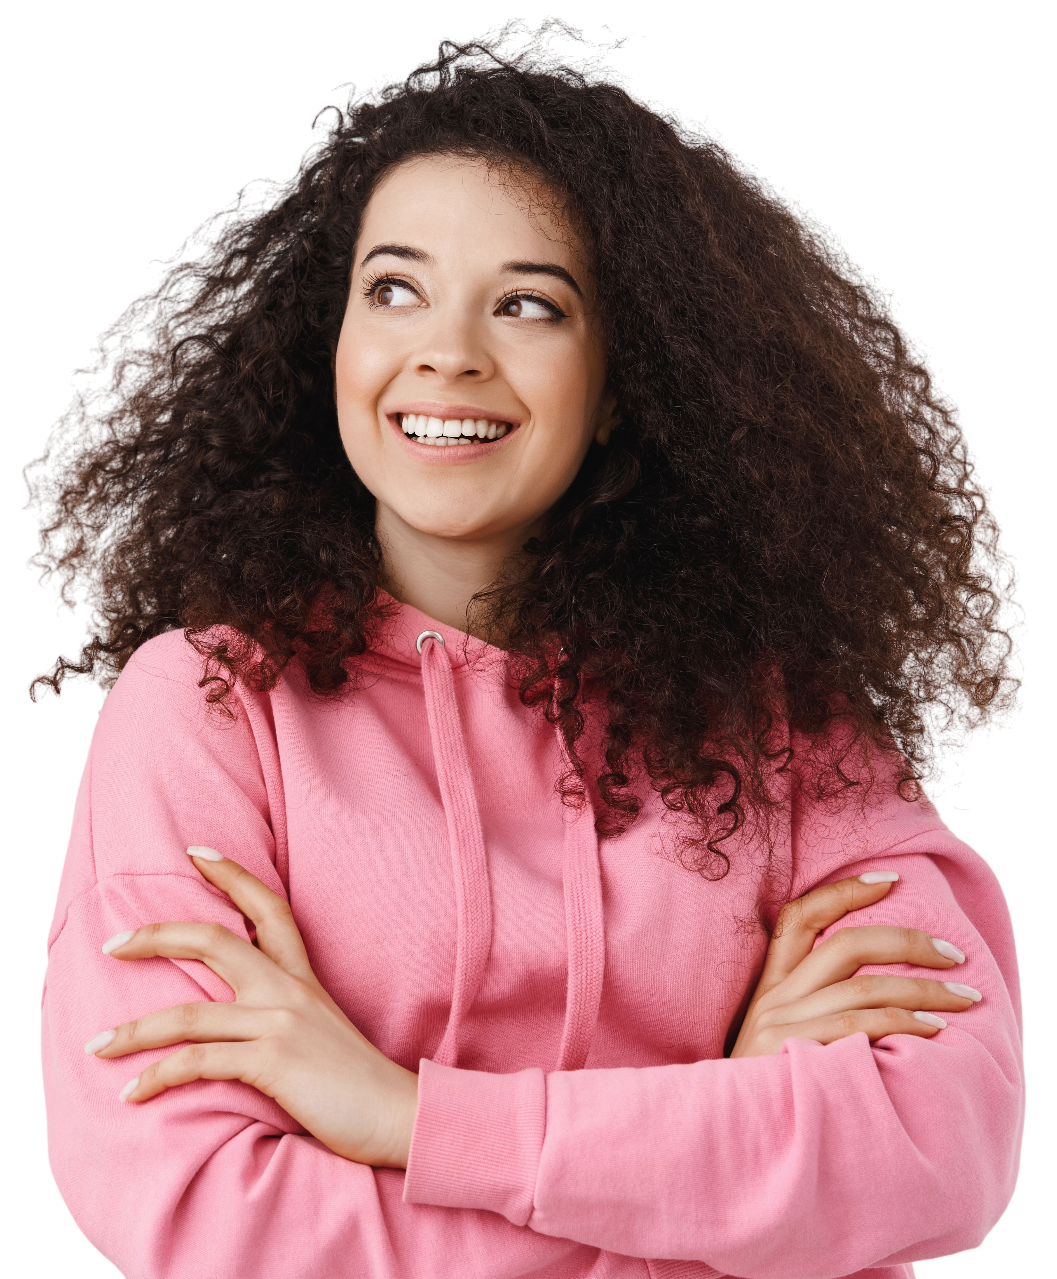 Curly haired girl smiling with arms folded and looking up